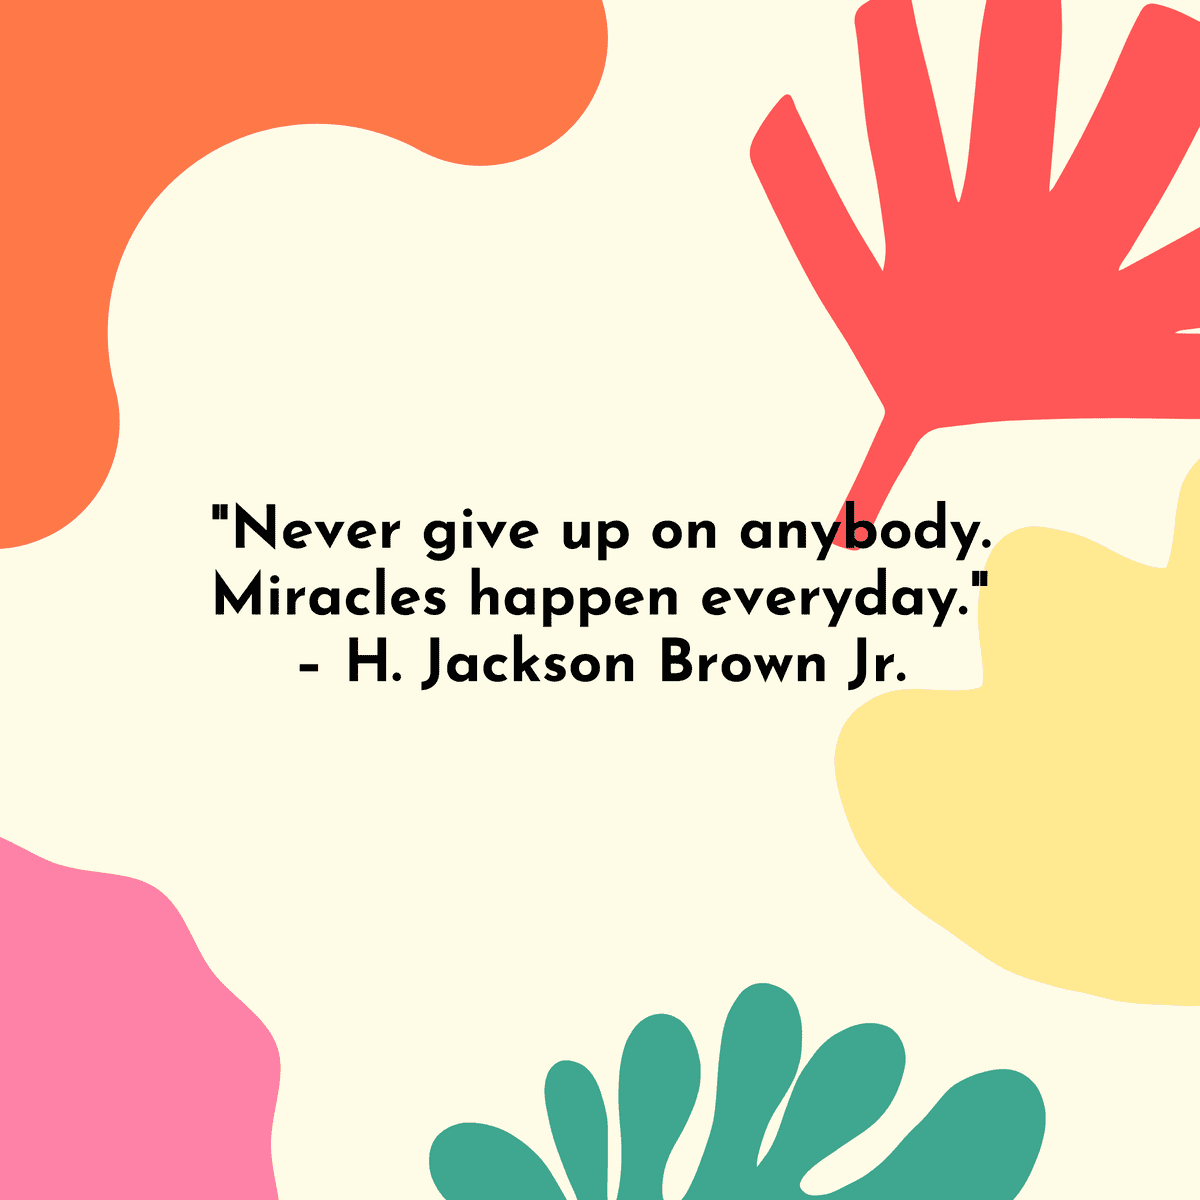 "Never give up on anybody. Miracles happen everyday." – H. Jackson Brown Jr.